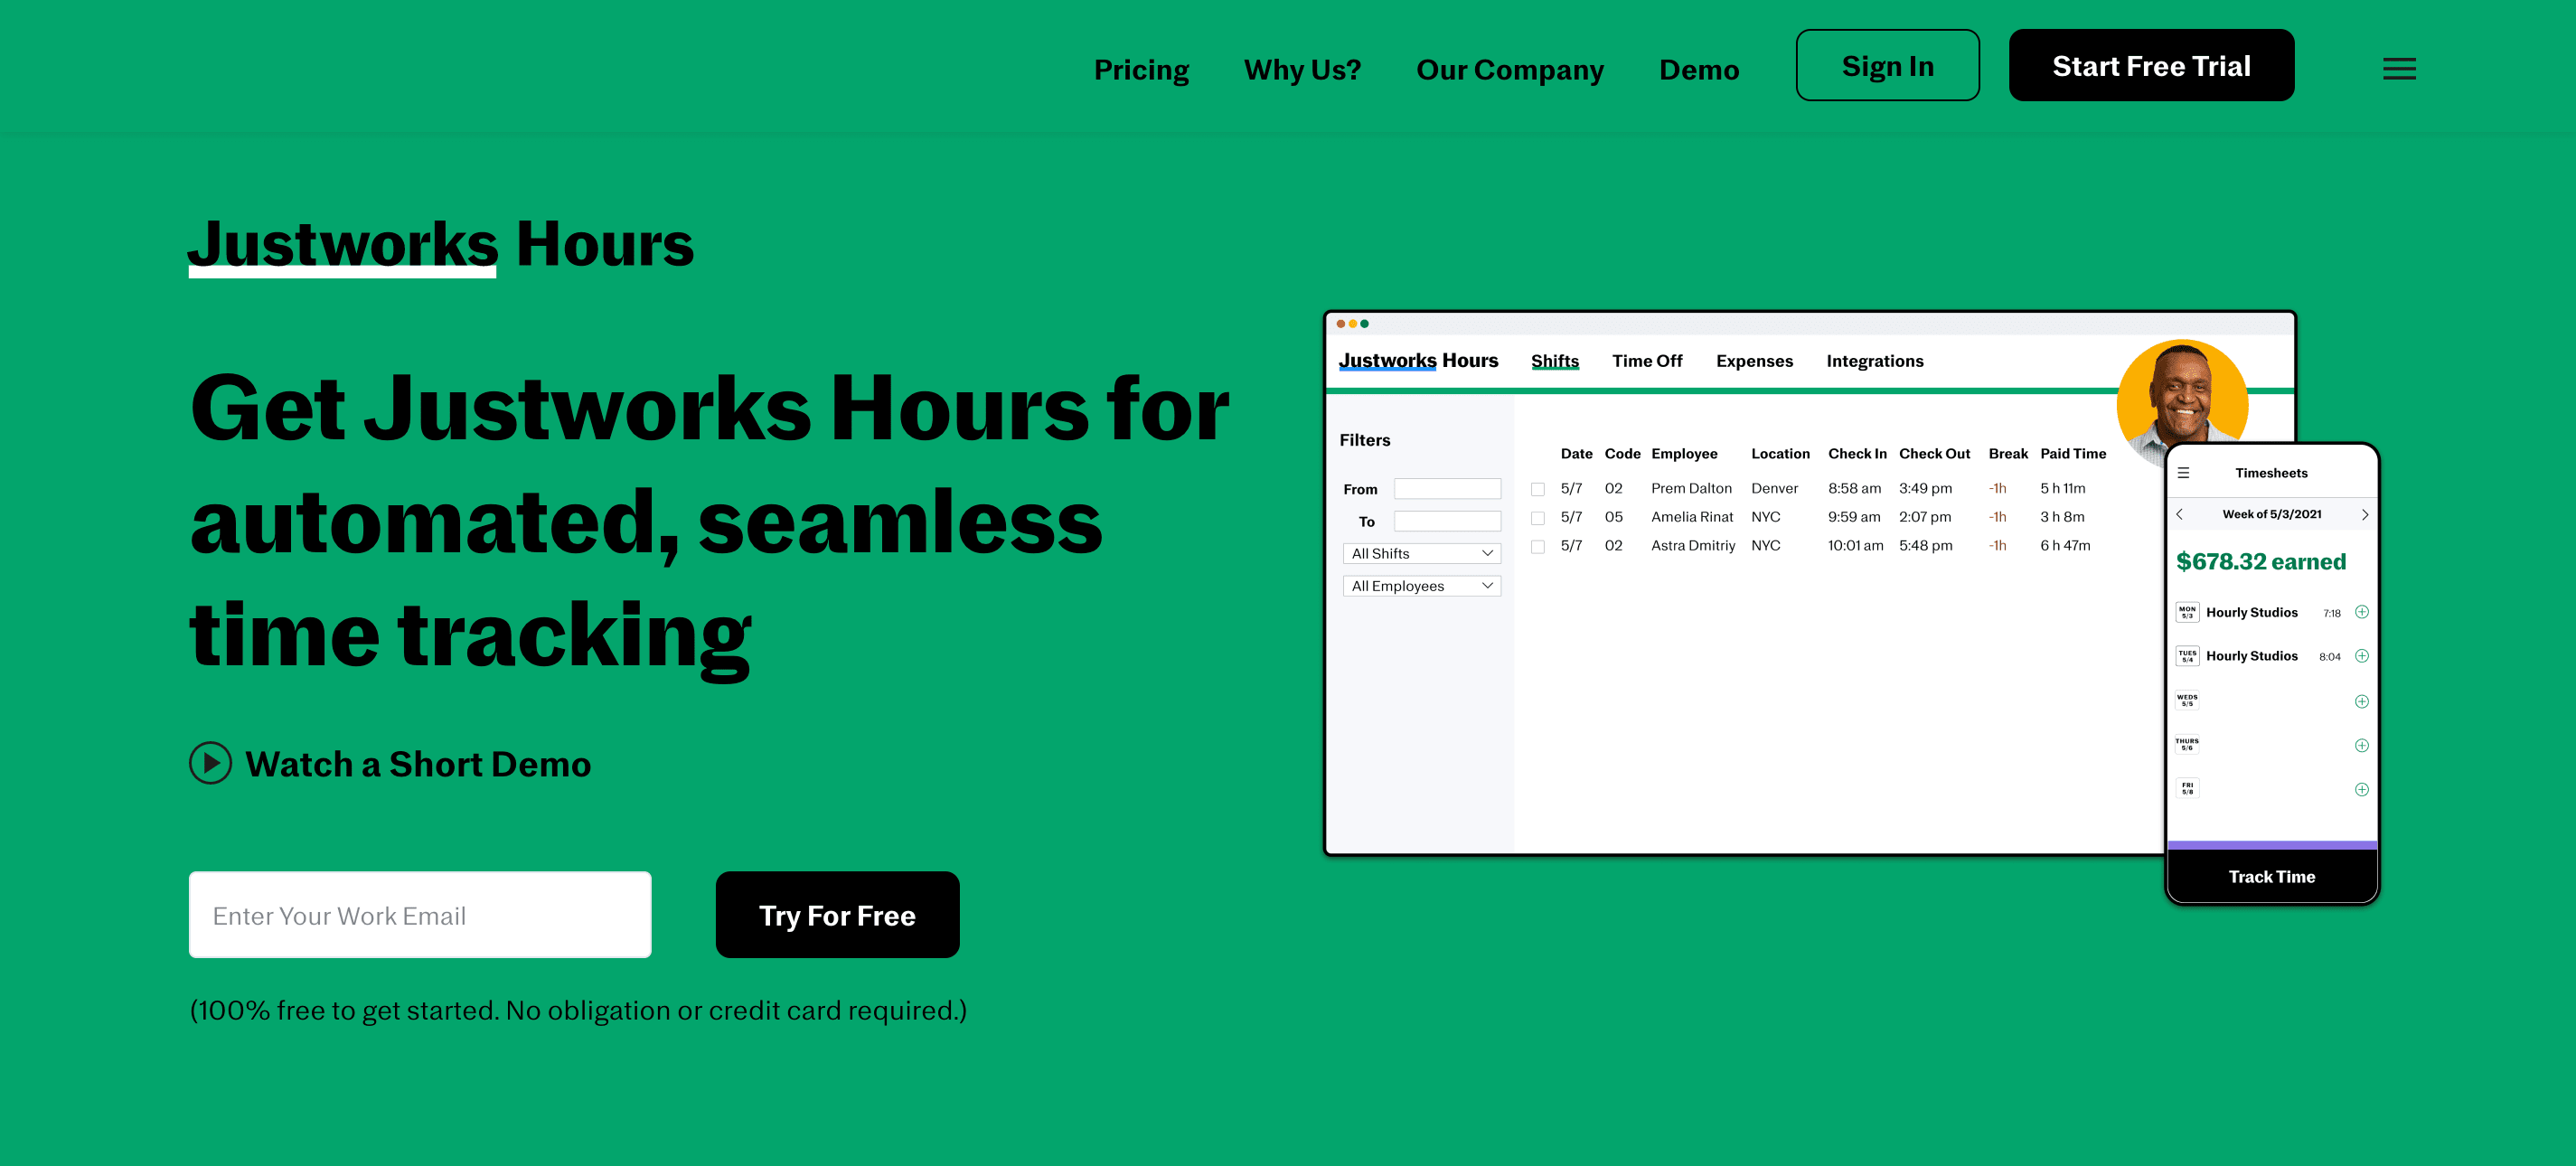 Justworks Hours home page